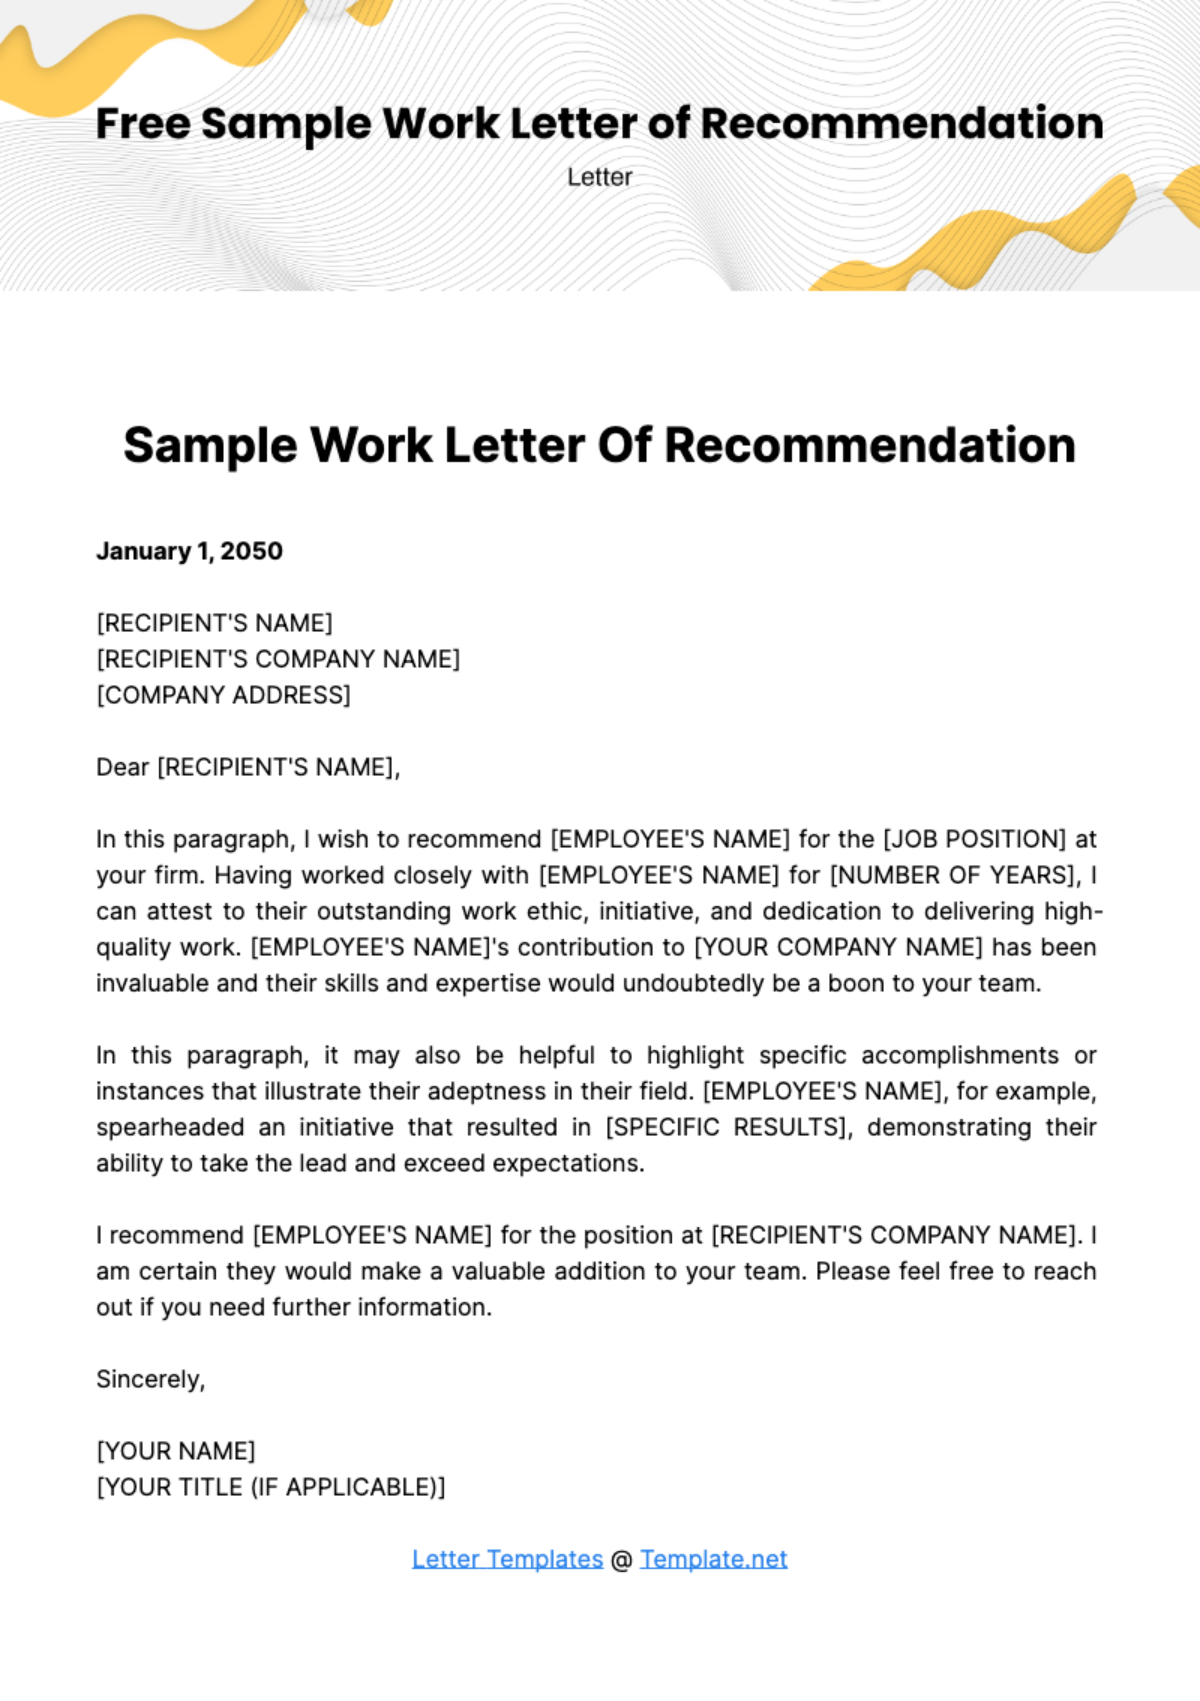 Free Sample Work Letter of Recommendation Template